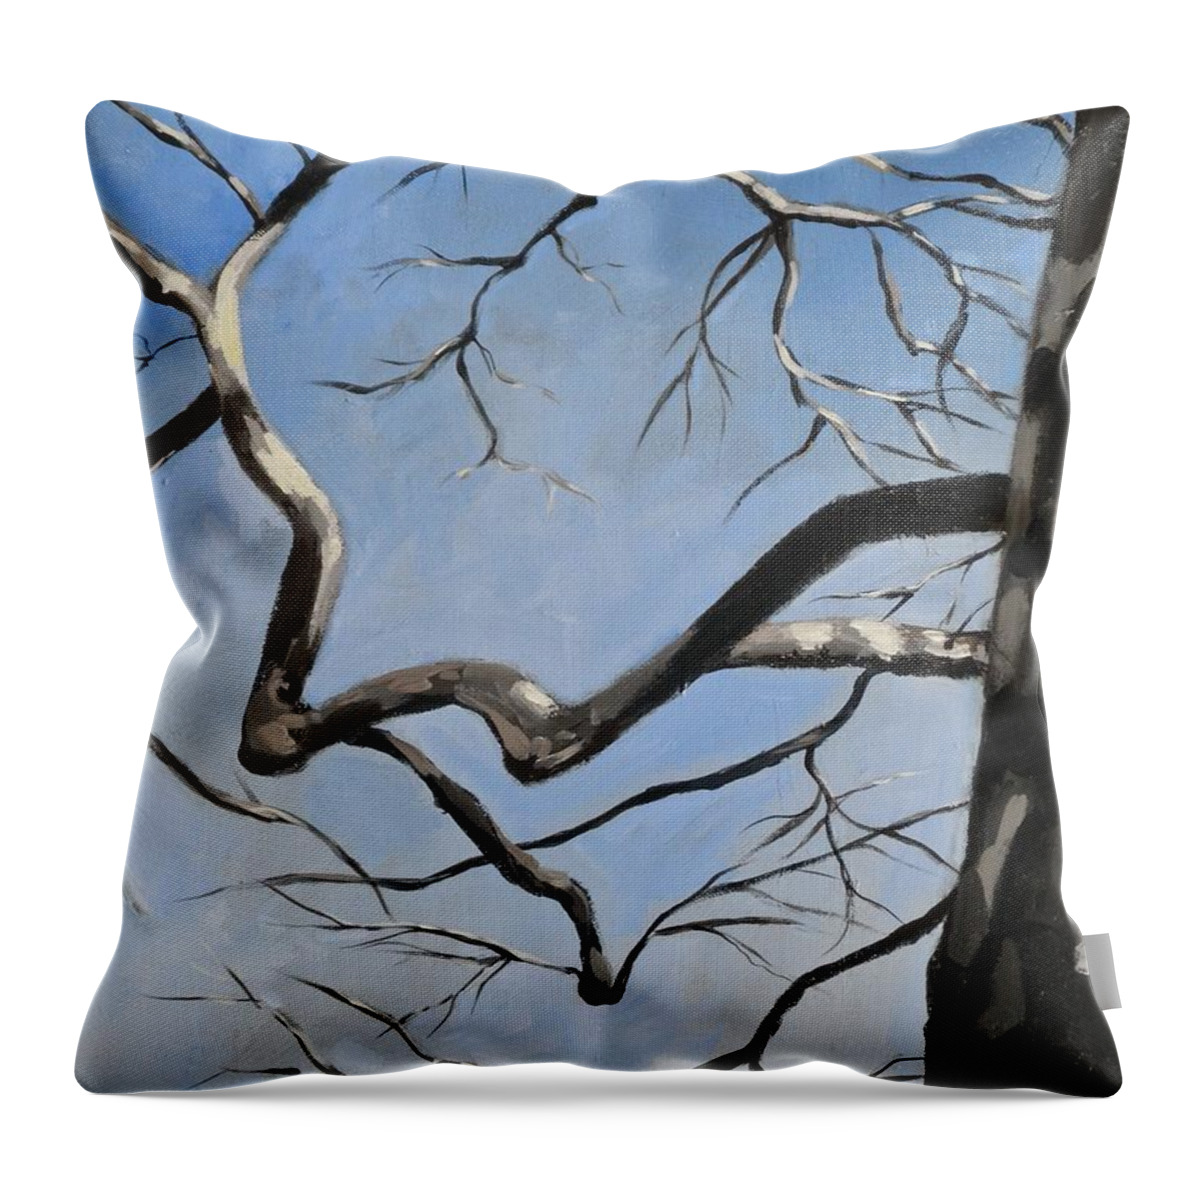 Landscape Throw Pillow featuring the painting Naked Sycamore by Outre Art Natalie Eisen